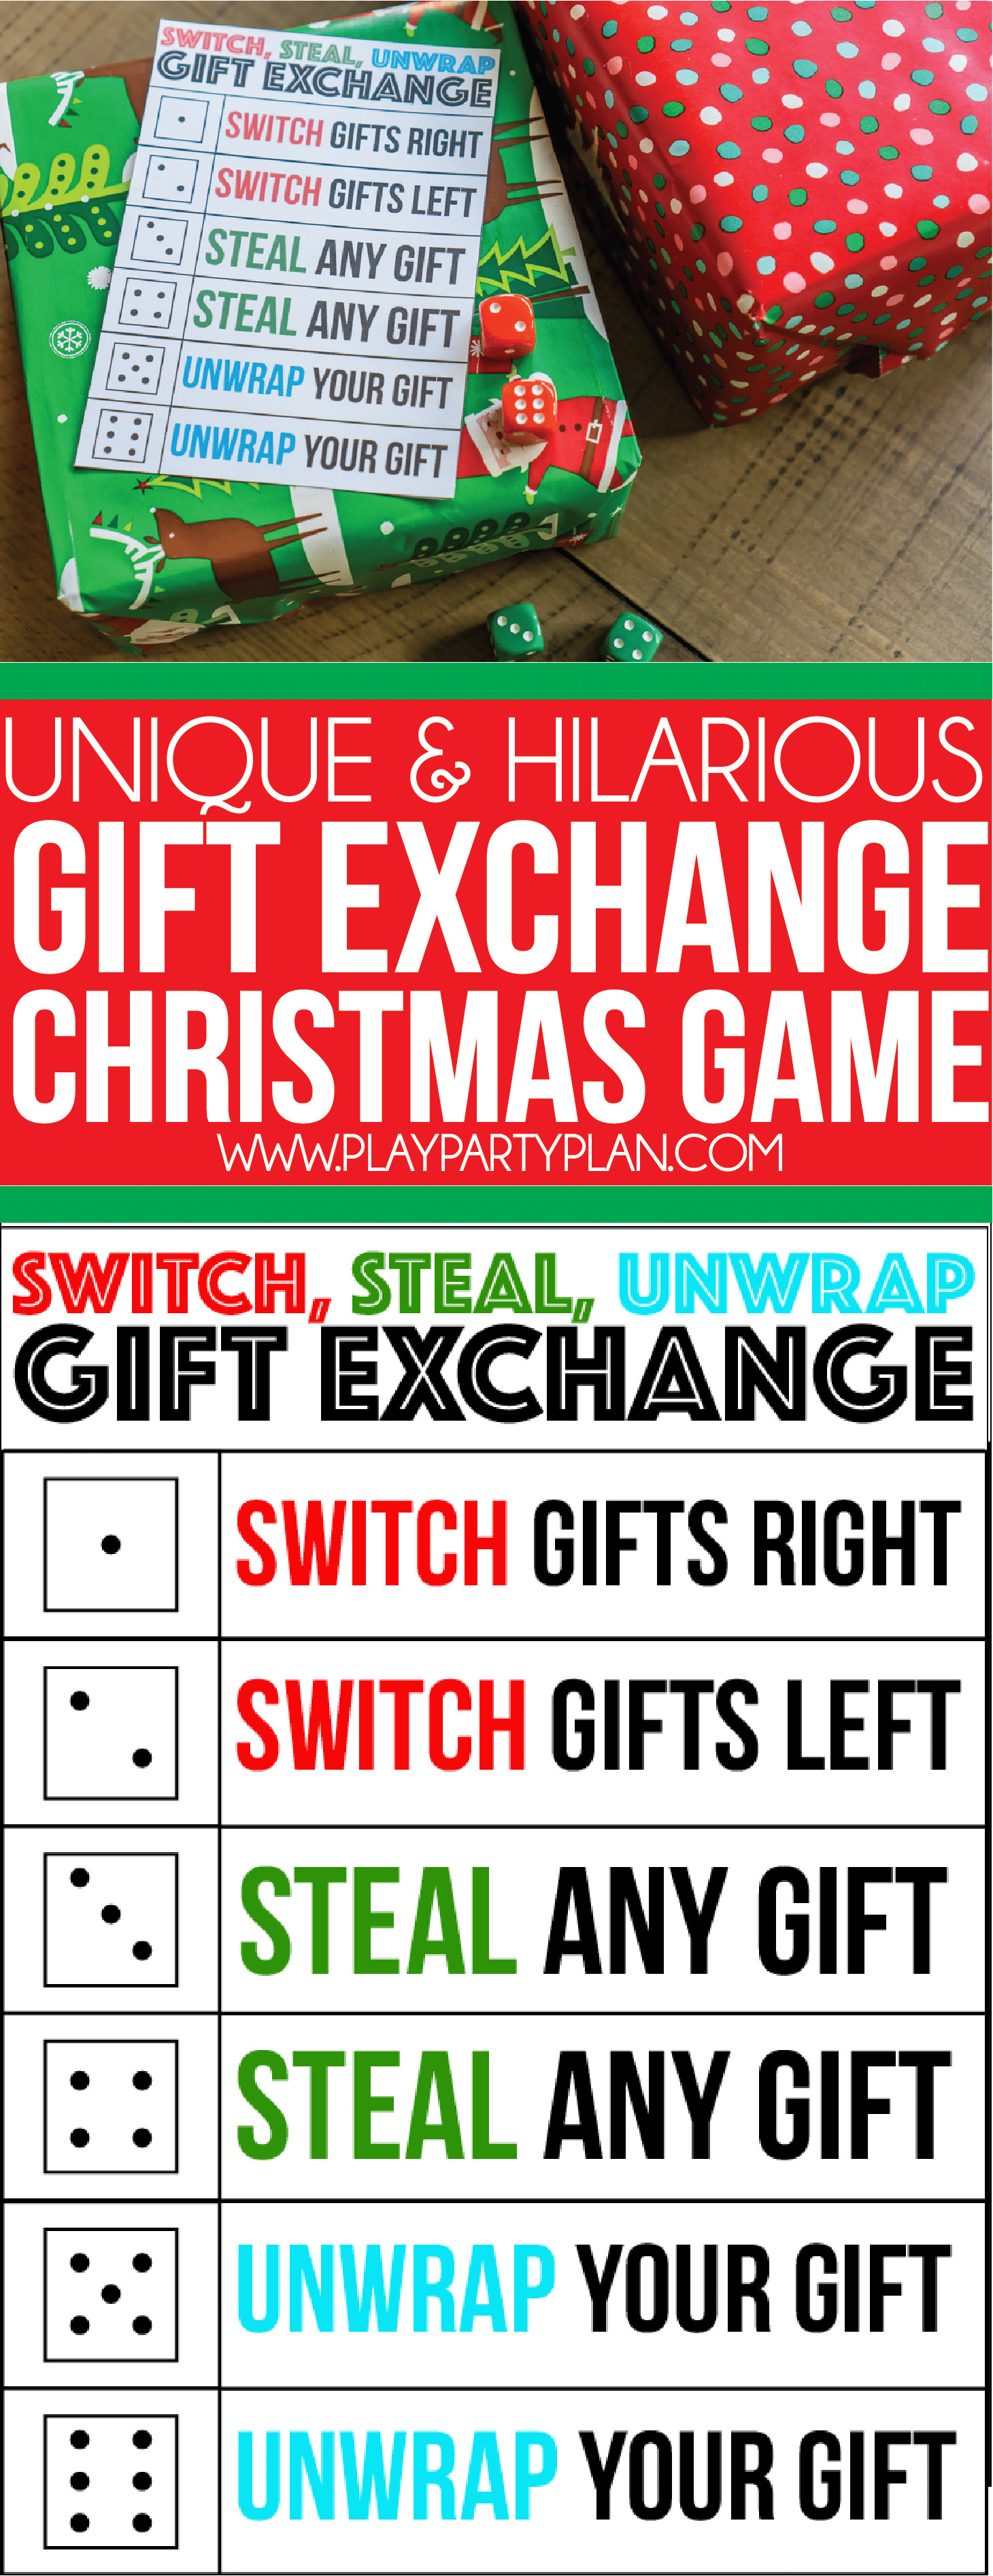 Christmas Gift Exchange Game Ideas
 The Best Gift Exchange Game Ever Switch Steal or Unwrap